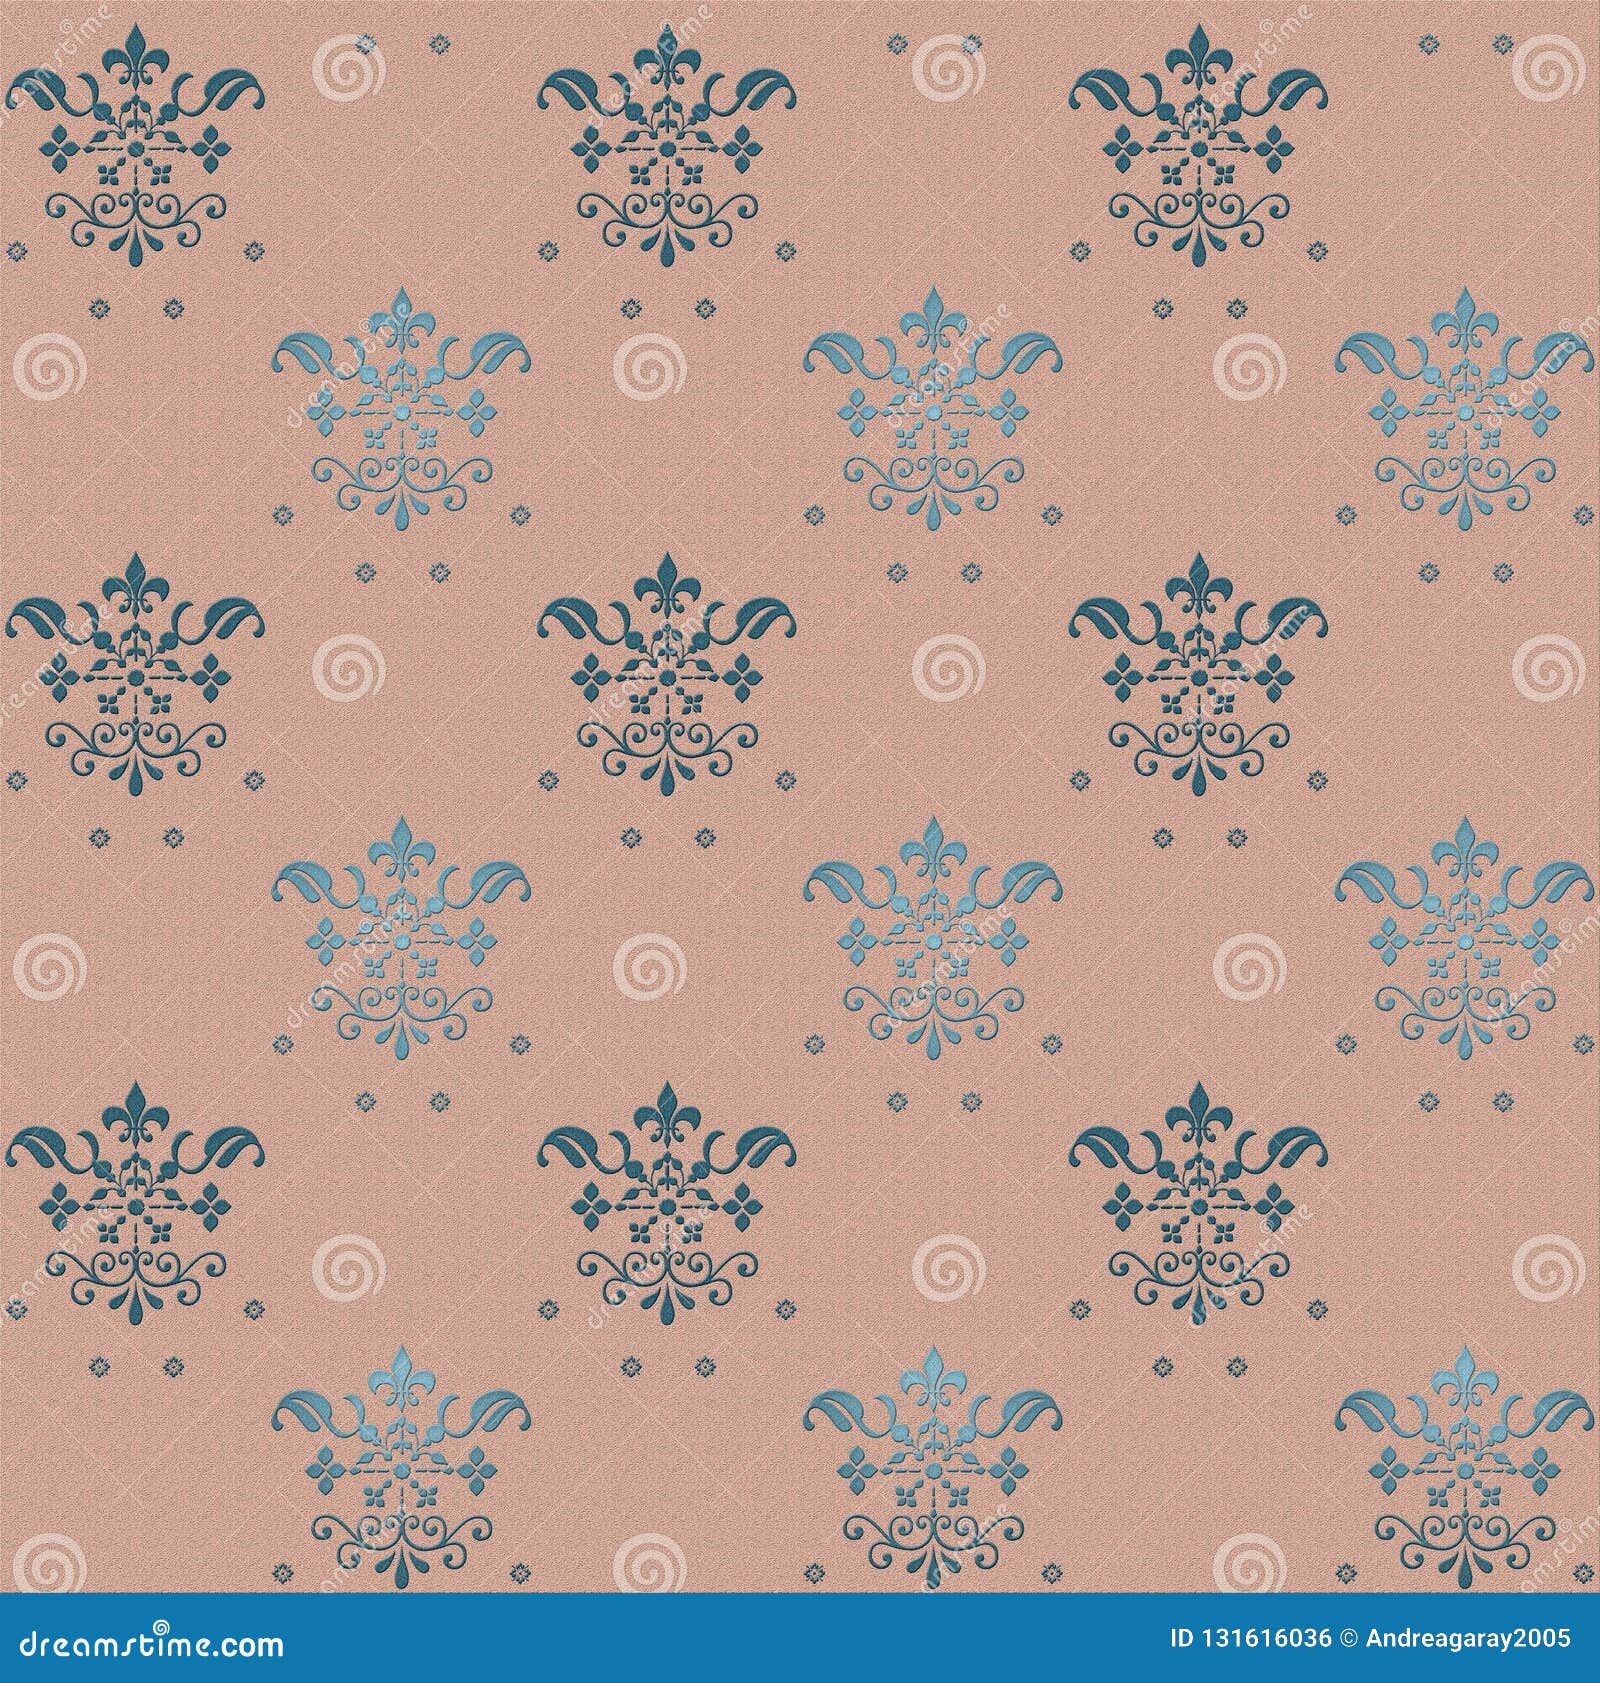 Seamless Gothic Wallpaper Pattern on Pink Background with Blue Floral  Elements Stock Illustration - Illustration of popular, baroque: 131616036